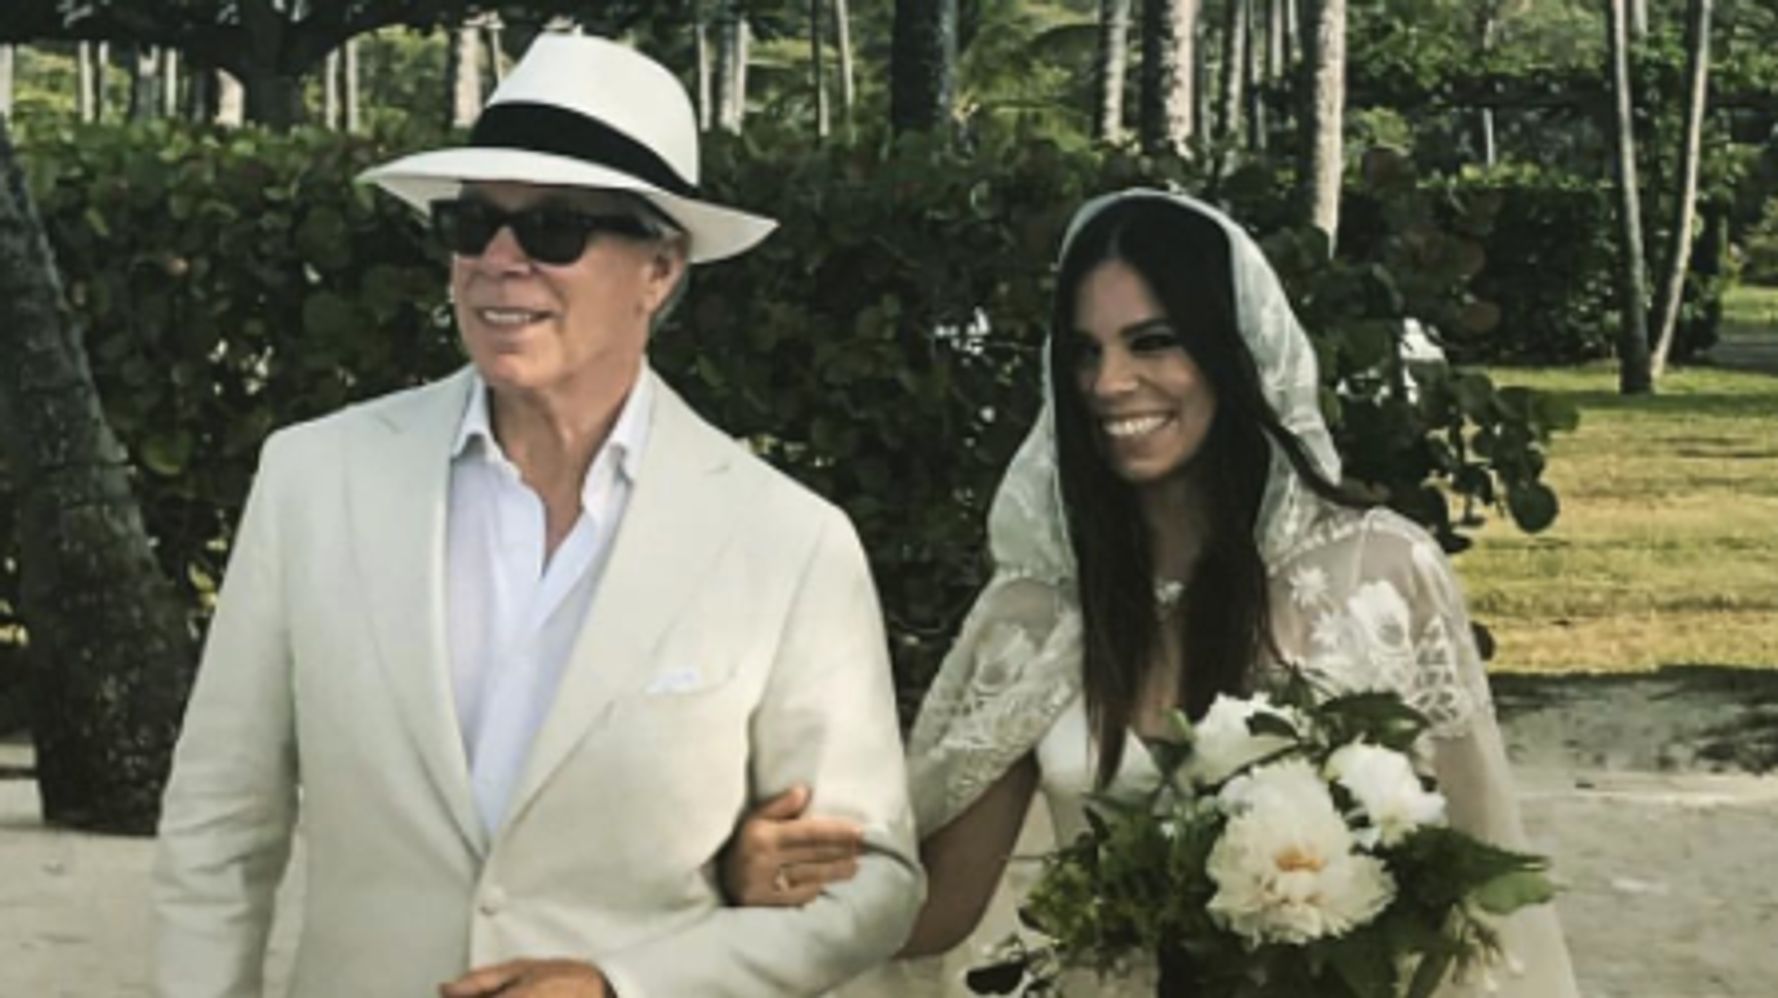 Awww! Tommy Hilfiger Helped His Dress | HuffPost Life